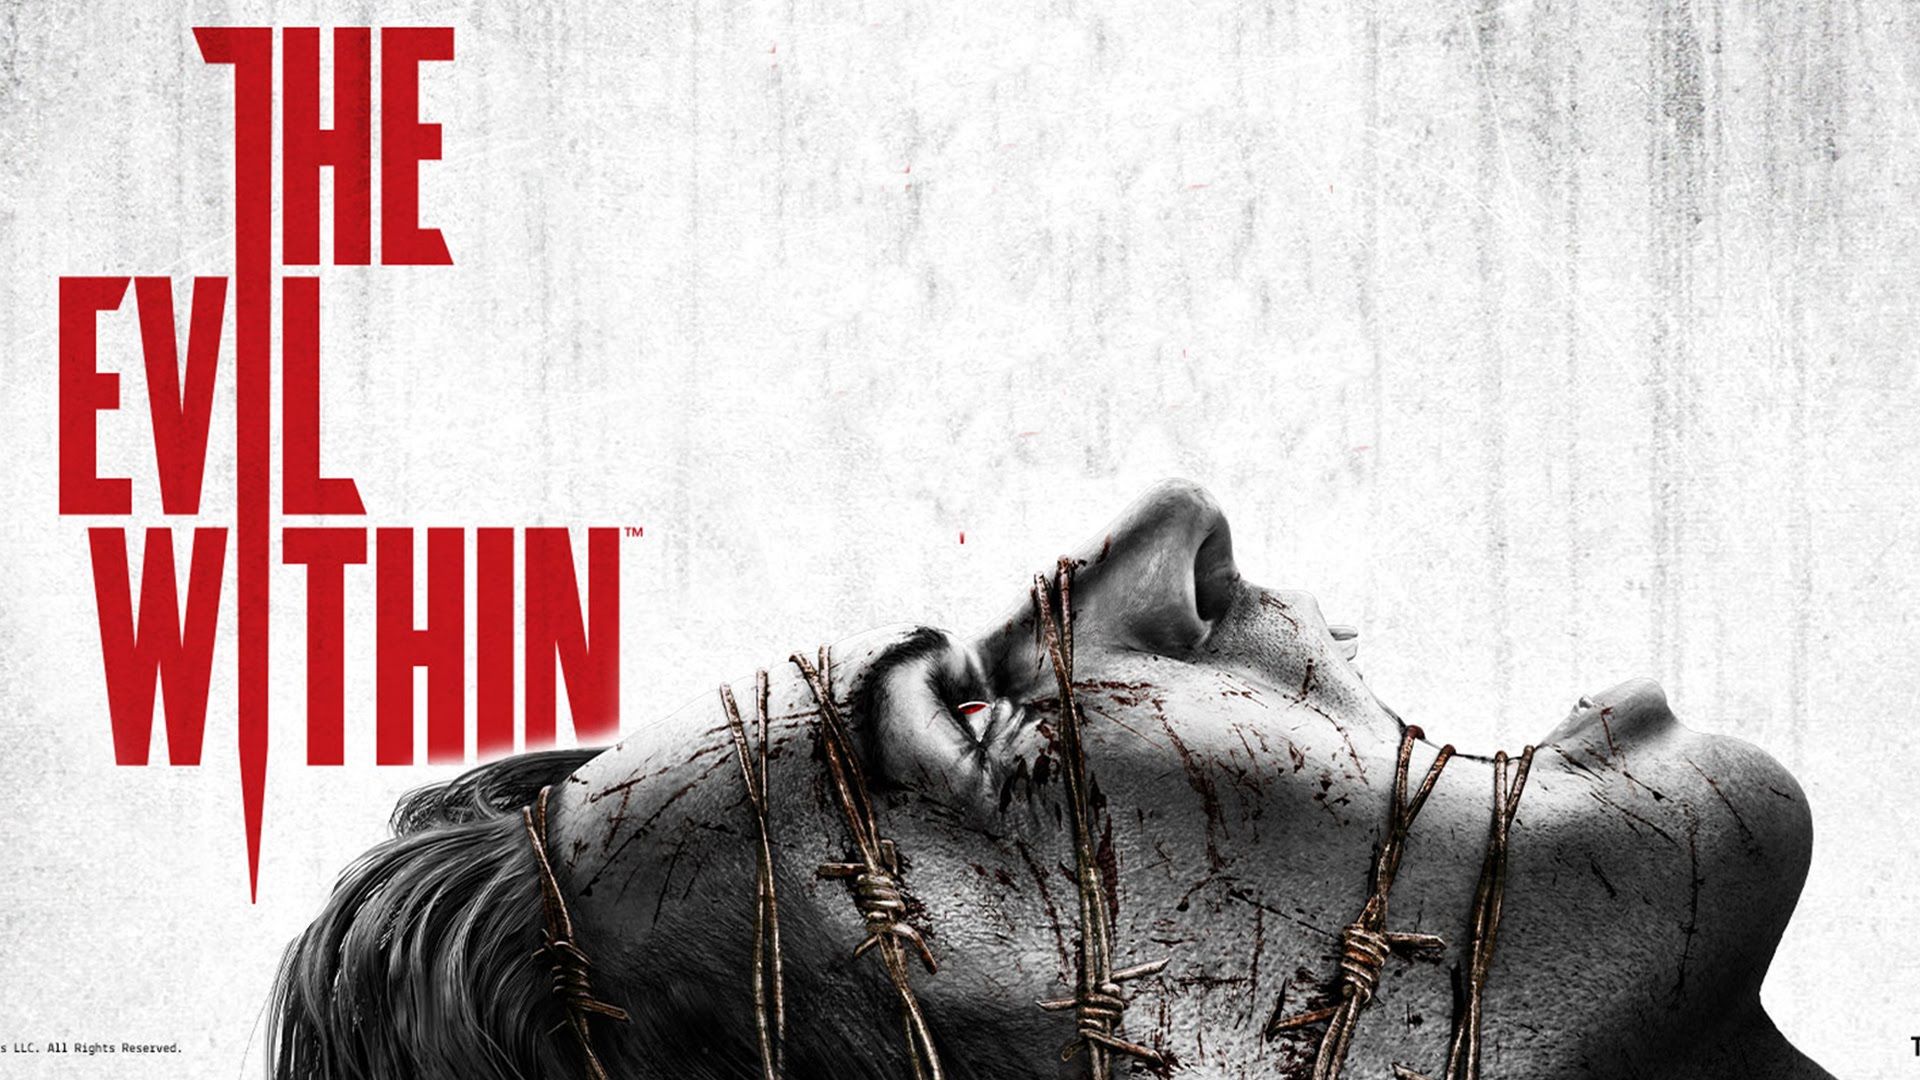 THE EVIL WITHIN - YouTube